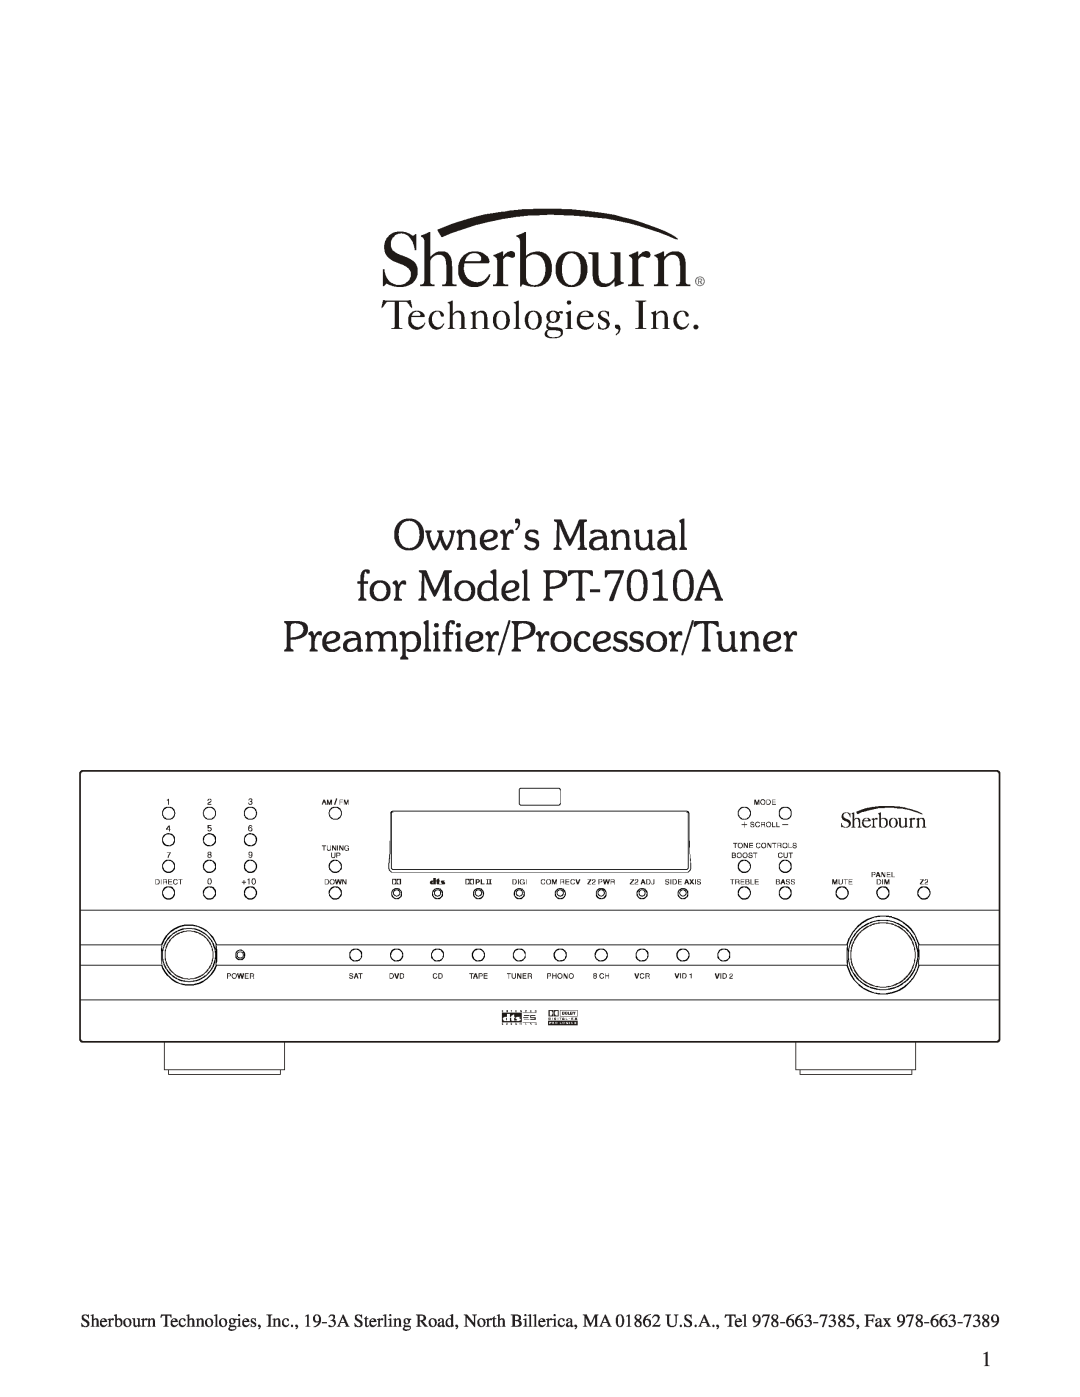 Sherbourn Technologies PT-7010A owner manual Preamplifier/Processor/Tuner 